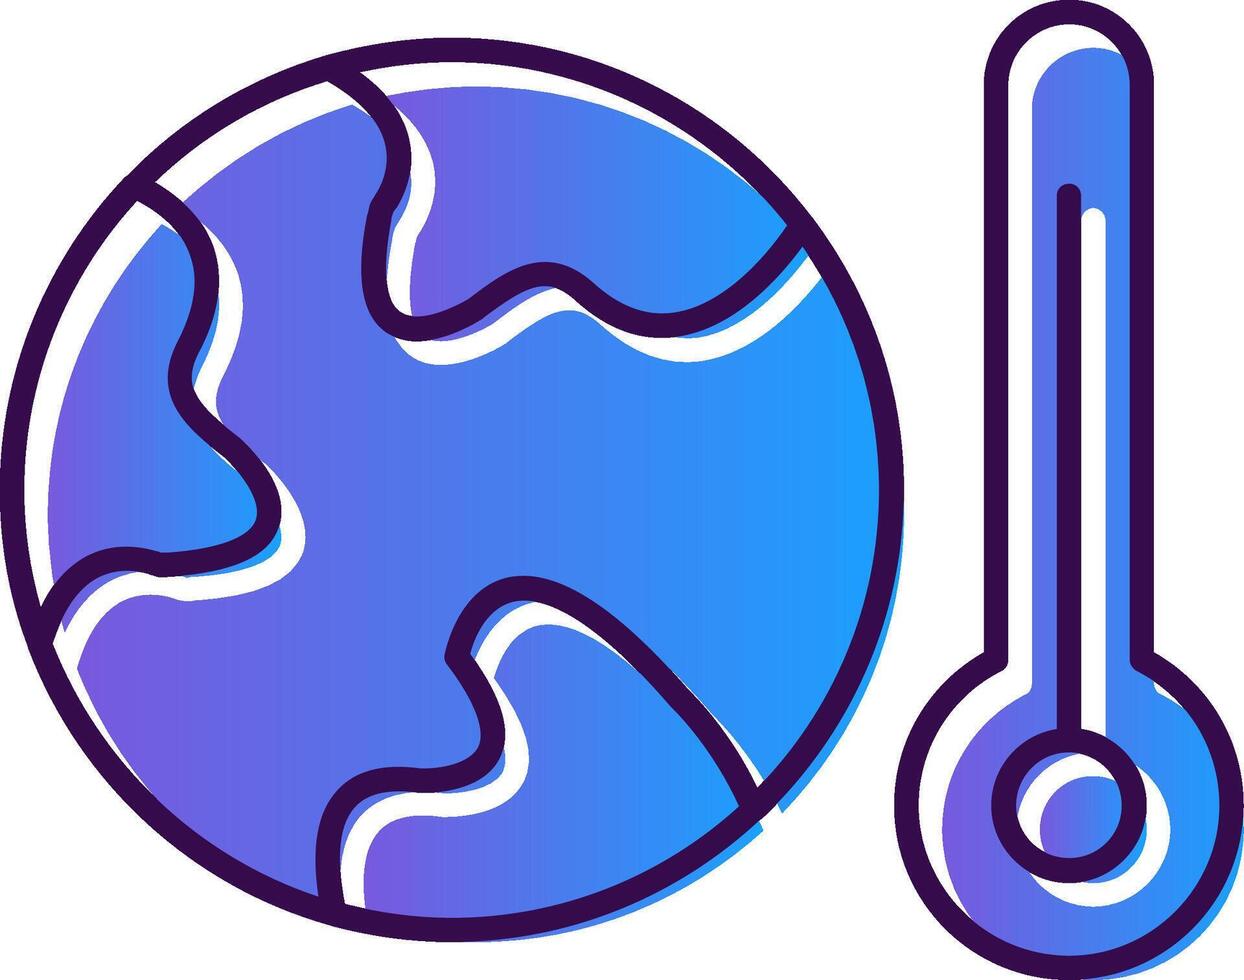 Global Warming Gradient Filled Icon vector